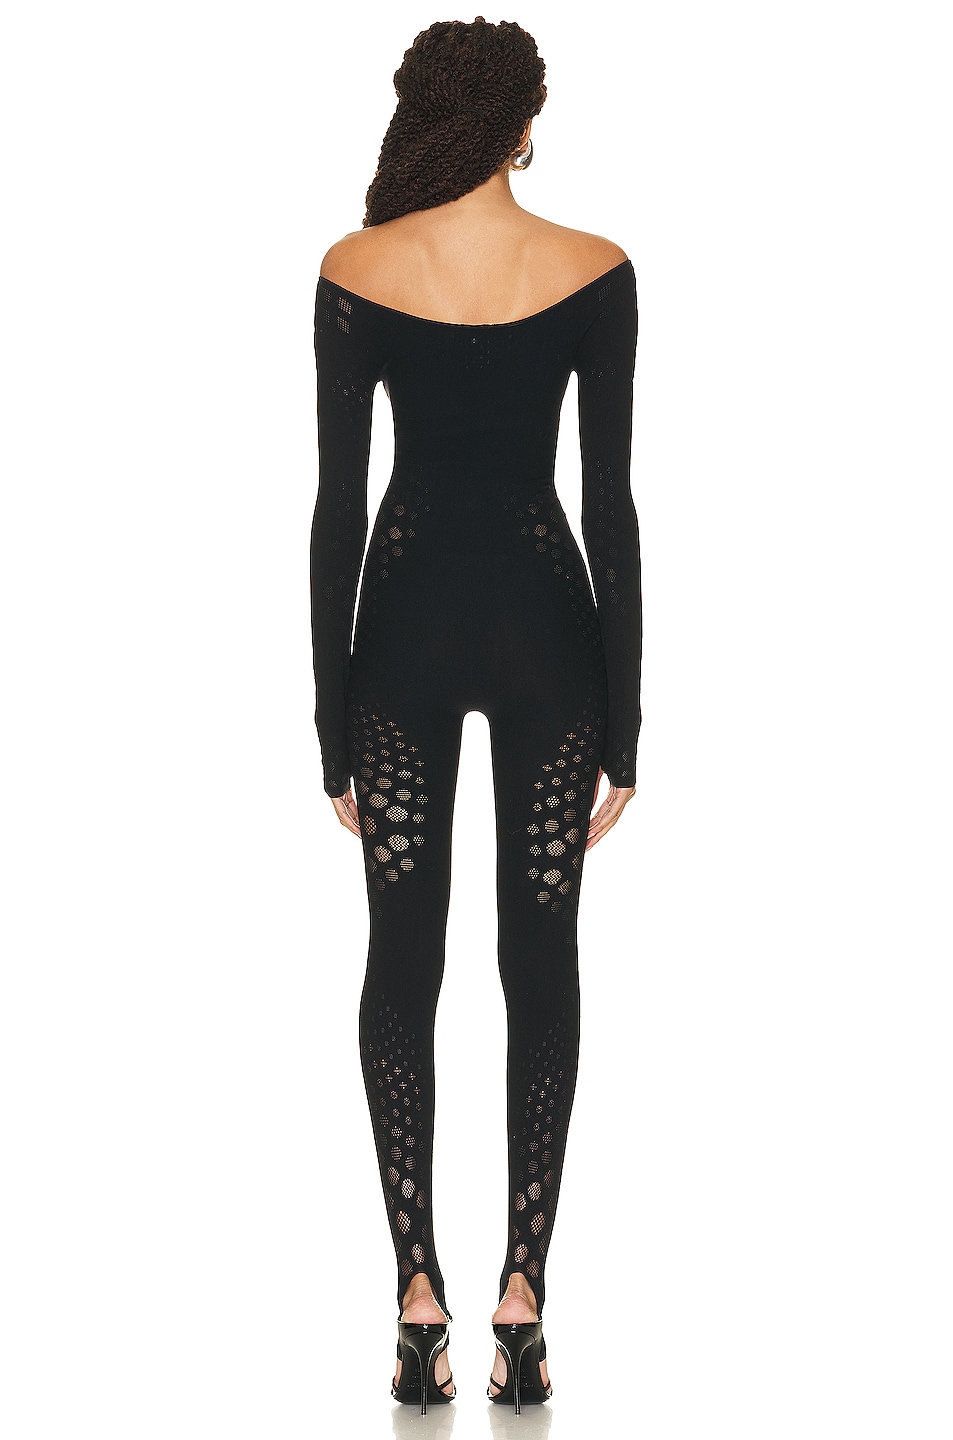 Wolford Dots Illusion Net Jumpsuit in Black | FWRD